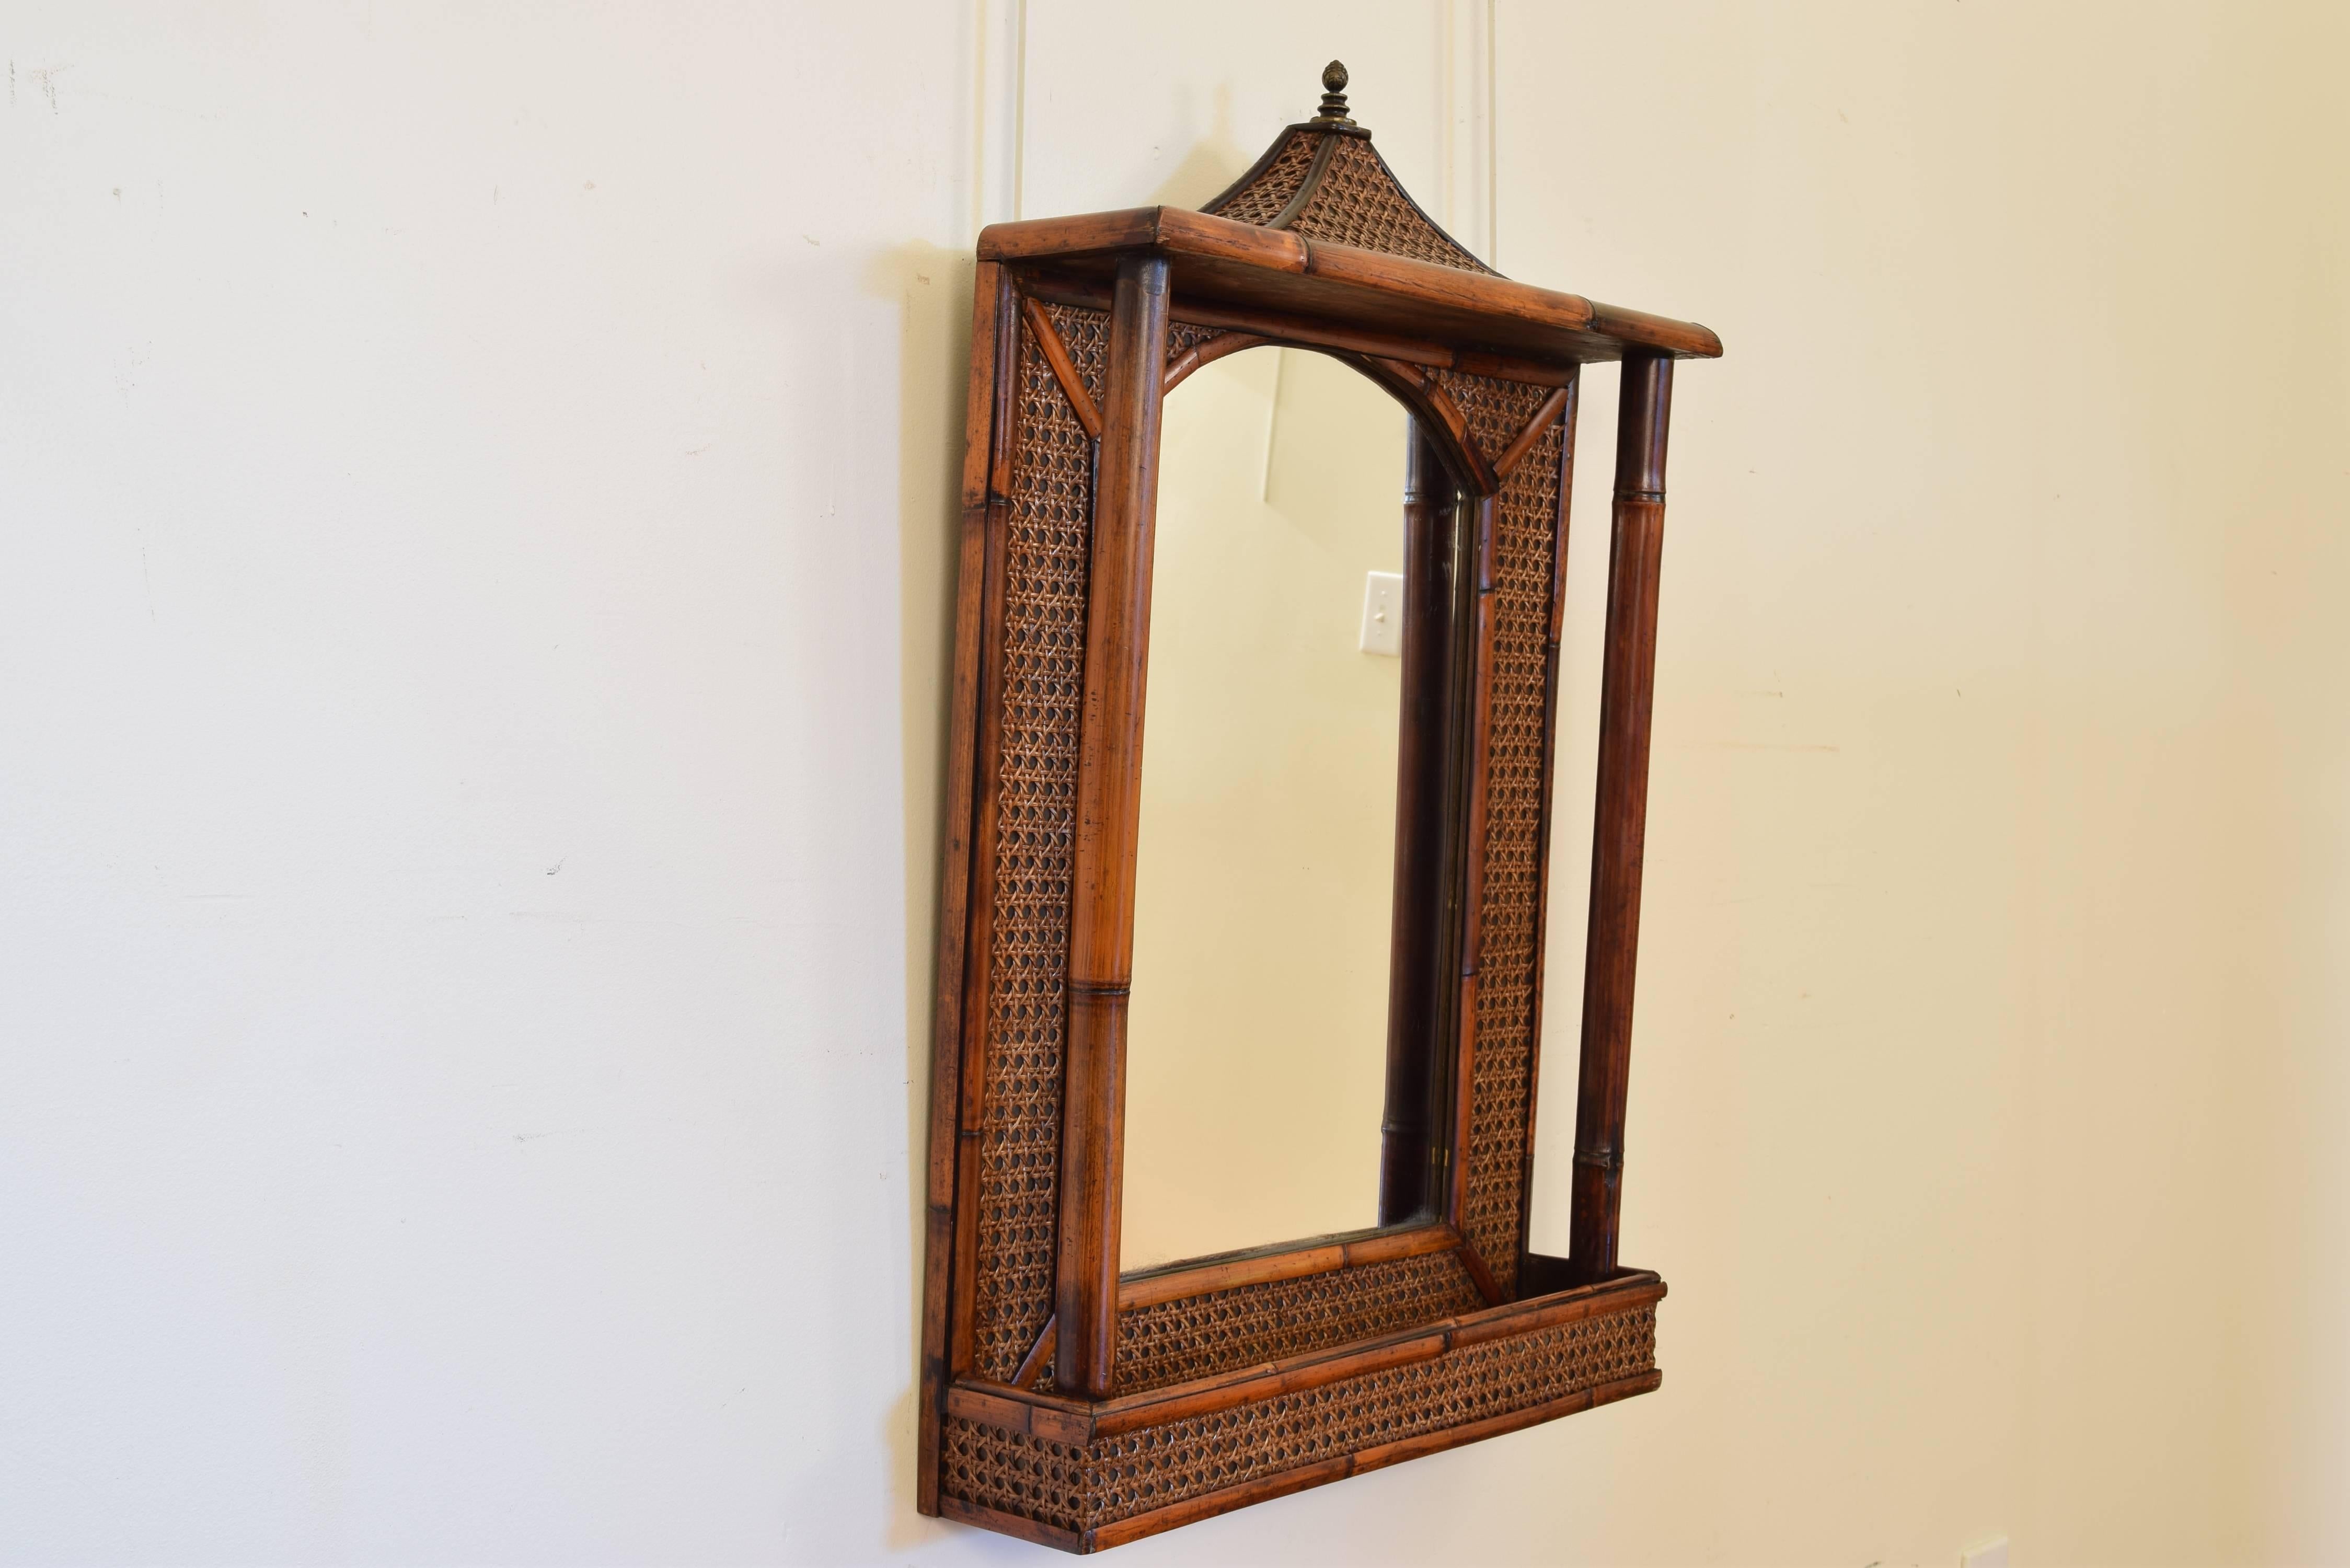 Having a pagoda shaped top with a brass finial, the mirror between bamboo columns, the lower section a tray.